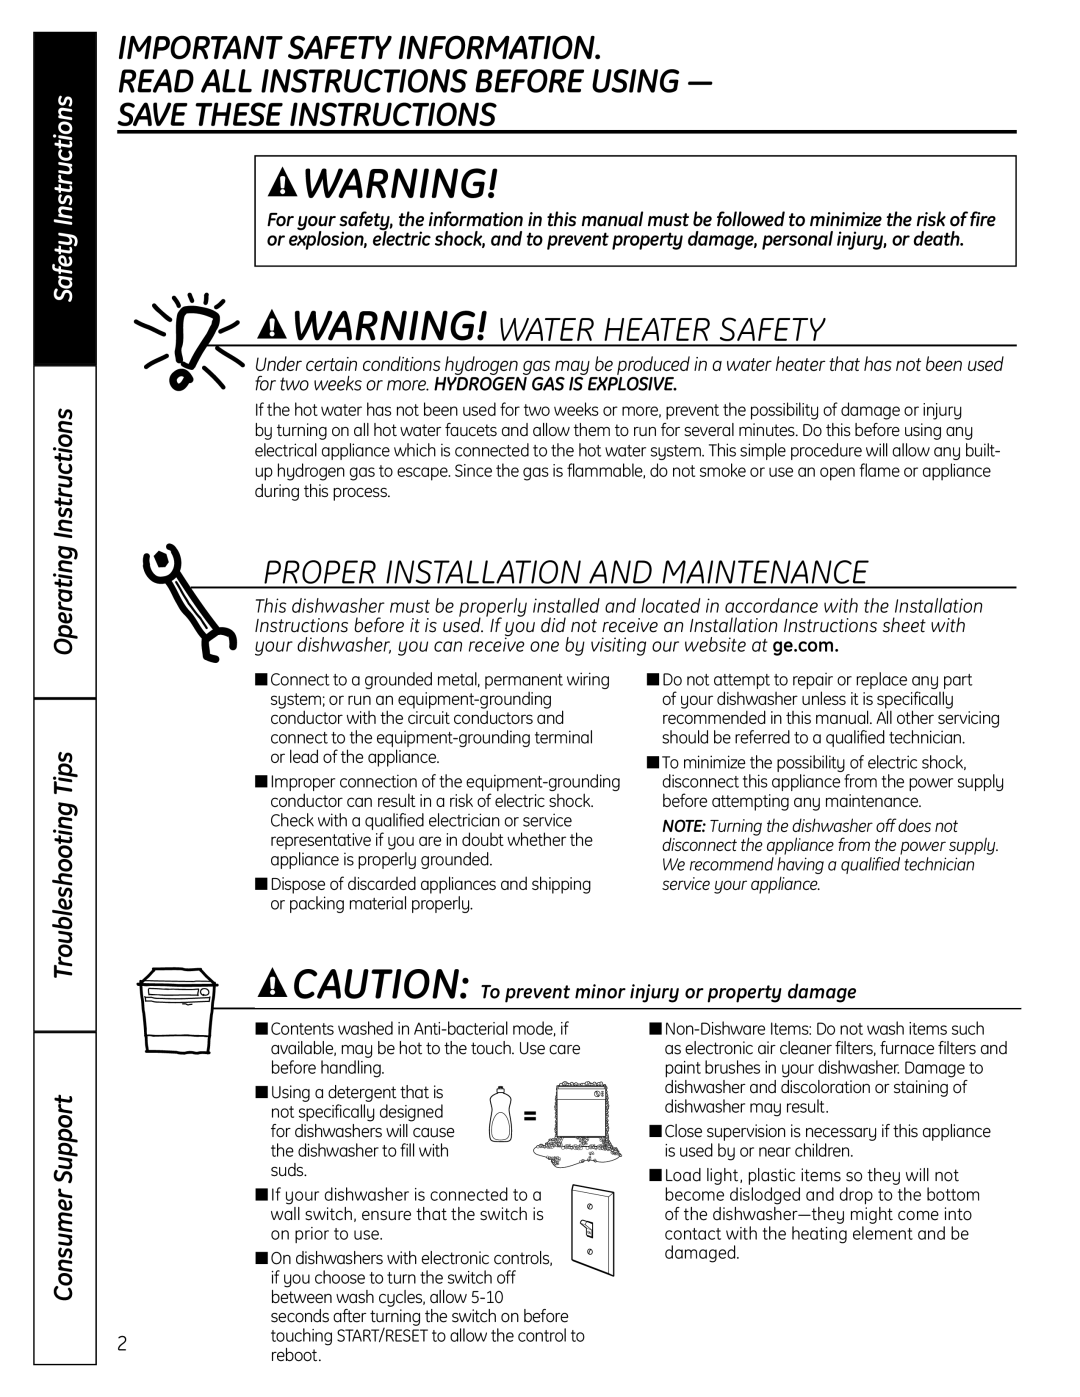 GE GLDL500 Important Safety Information, Read All Instructions Before Using, Save These Instructions, Safety Instructions 